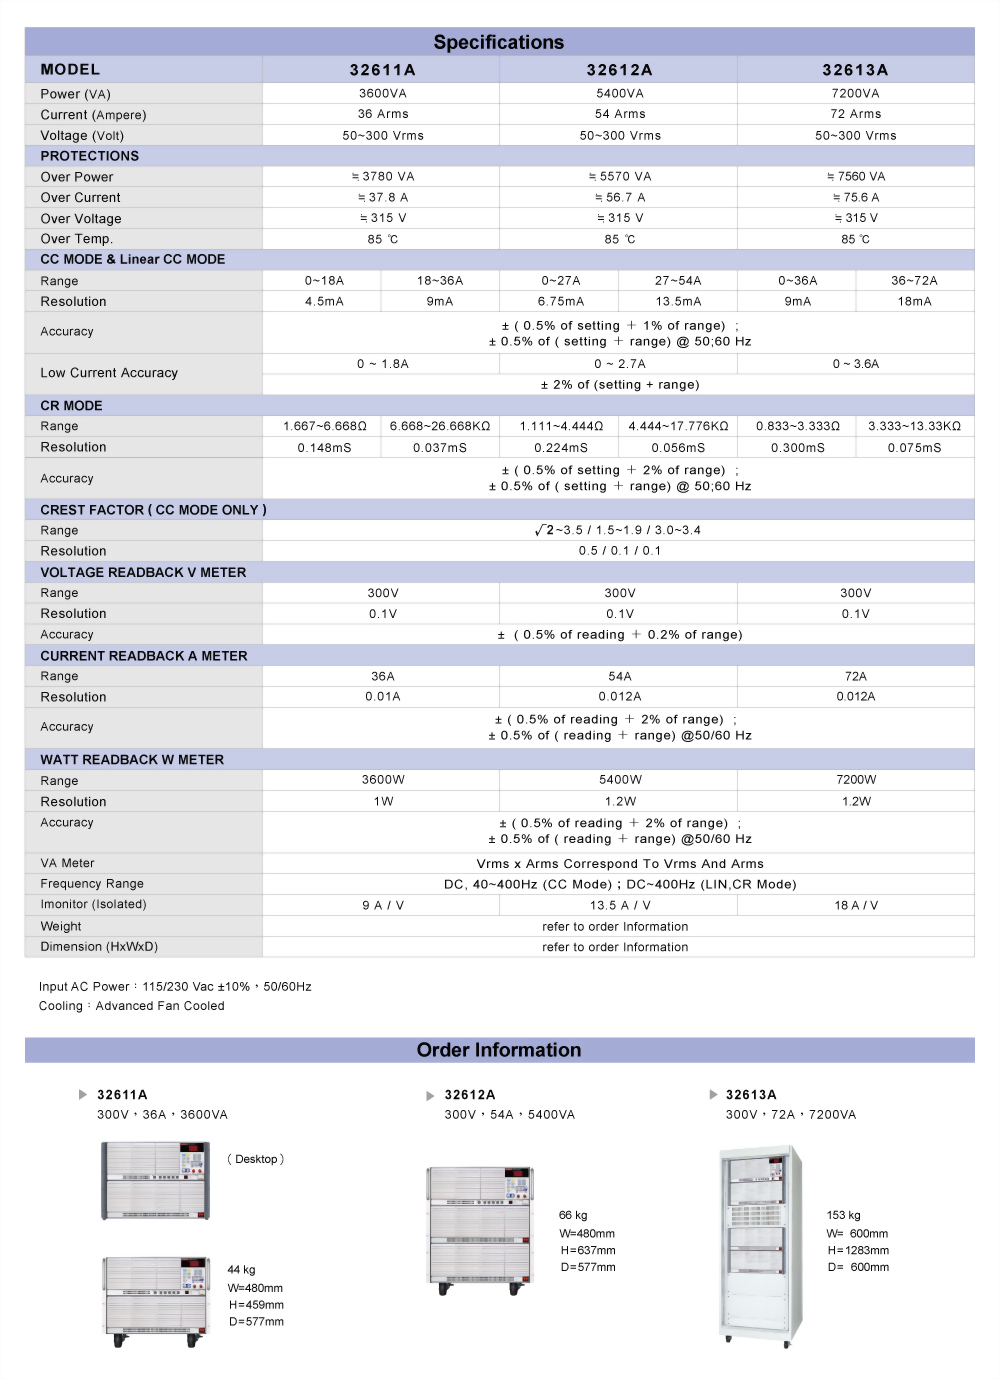 3260a-specifications_e02.jpg